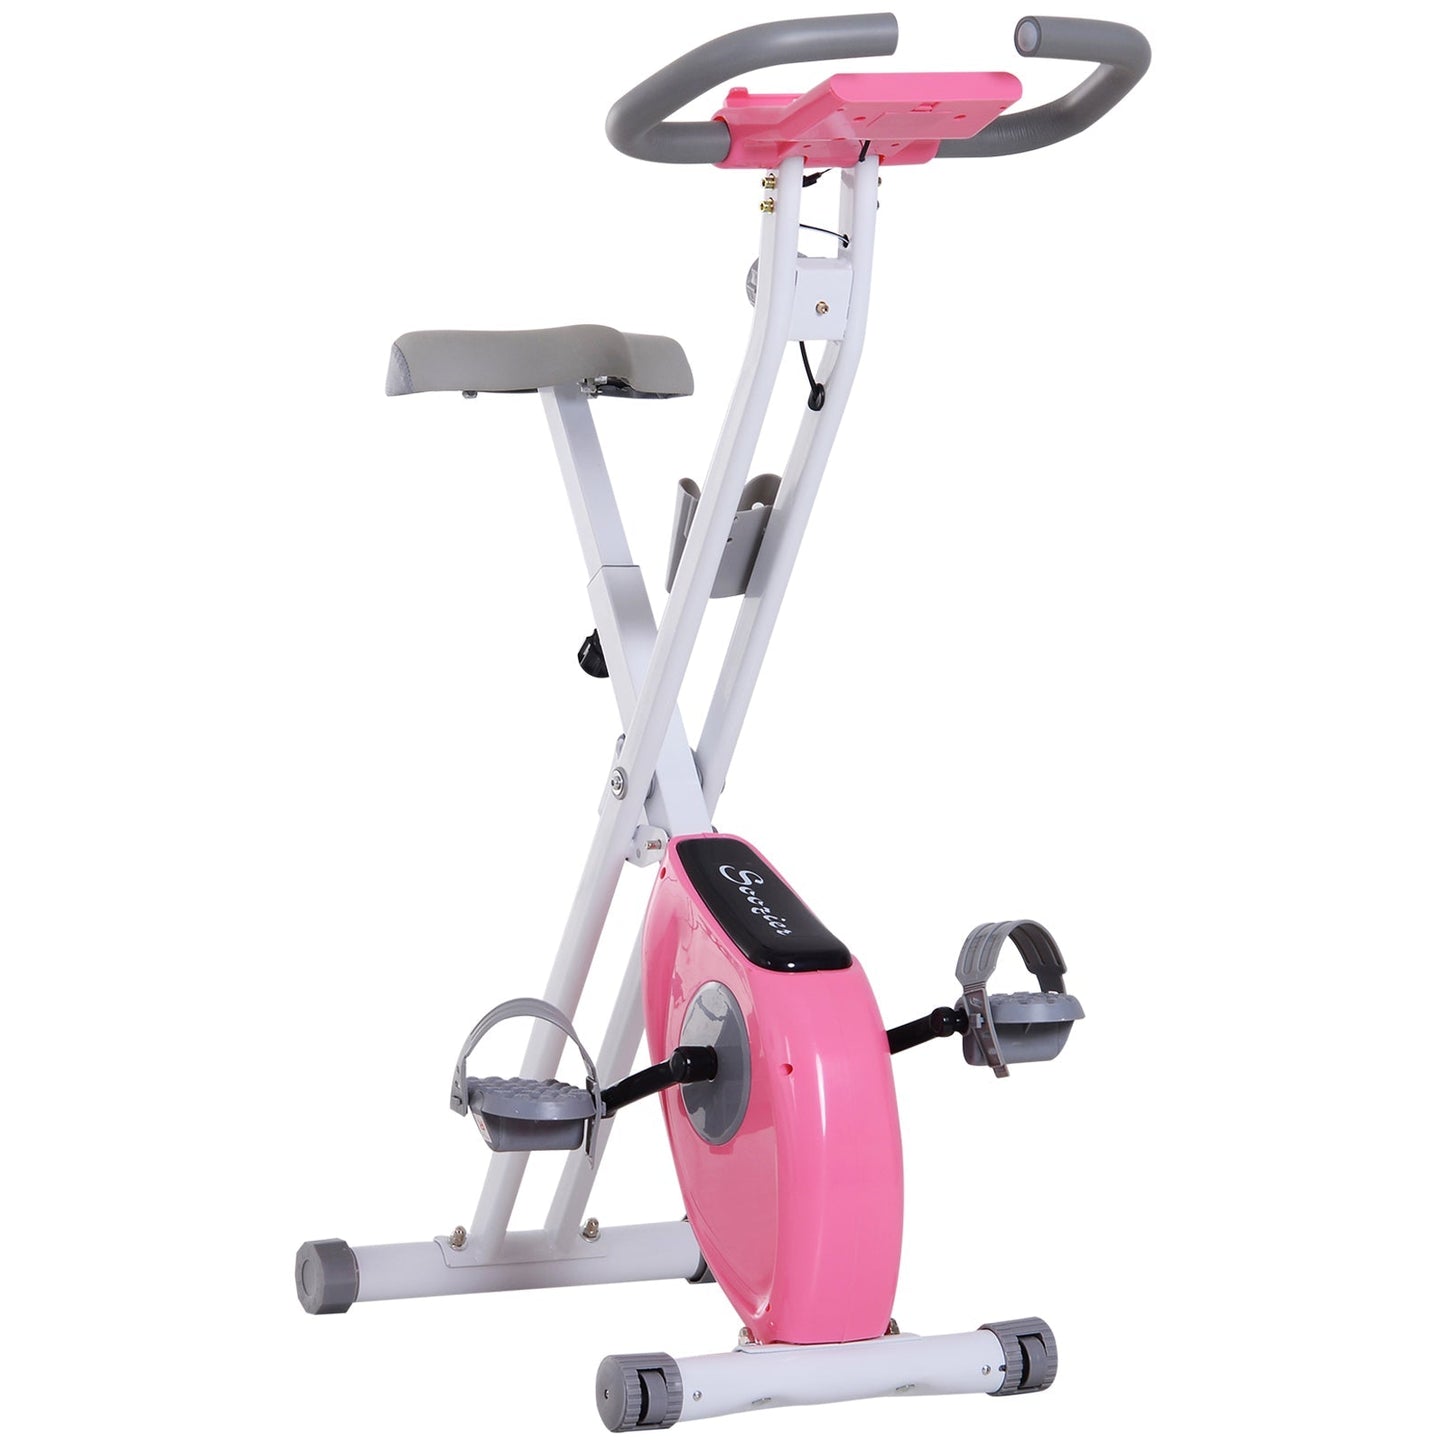 Foldable Exercise Bike with 8-Level Adjustable Magnetic Resistance, Indoor Stationary Bike X Bike with LCD Screen, Tablet Phone Holder for Home Aerobic Training, Pink at Gallery Canada